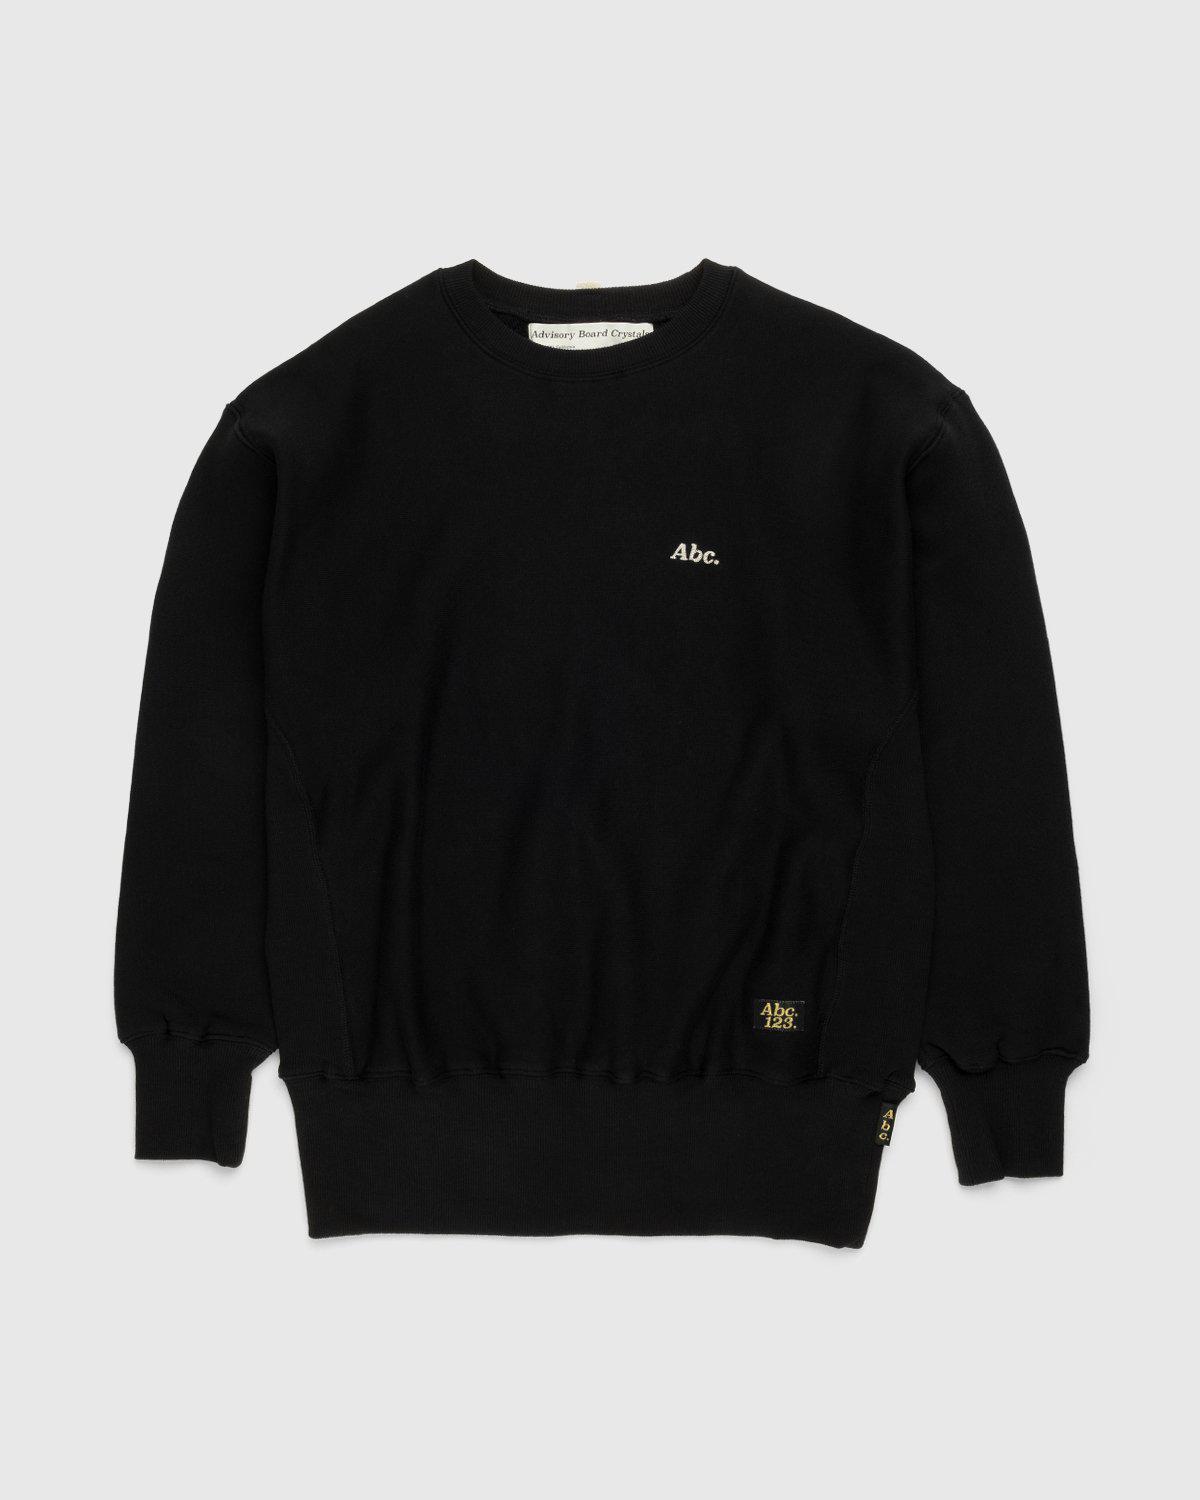 Abc. – French Terry Crewneck Sweatshirt Anthracite by ABC.